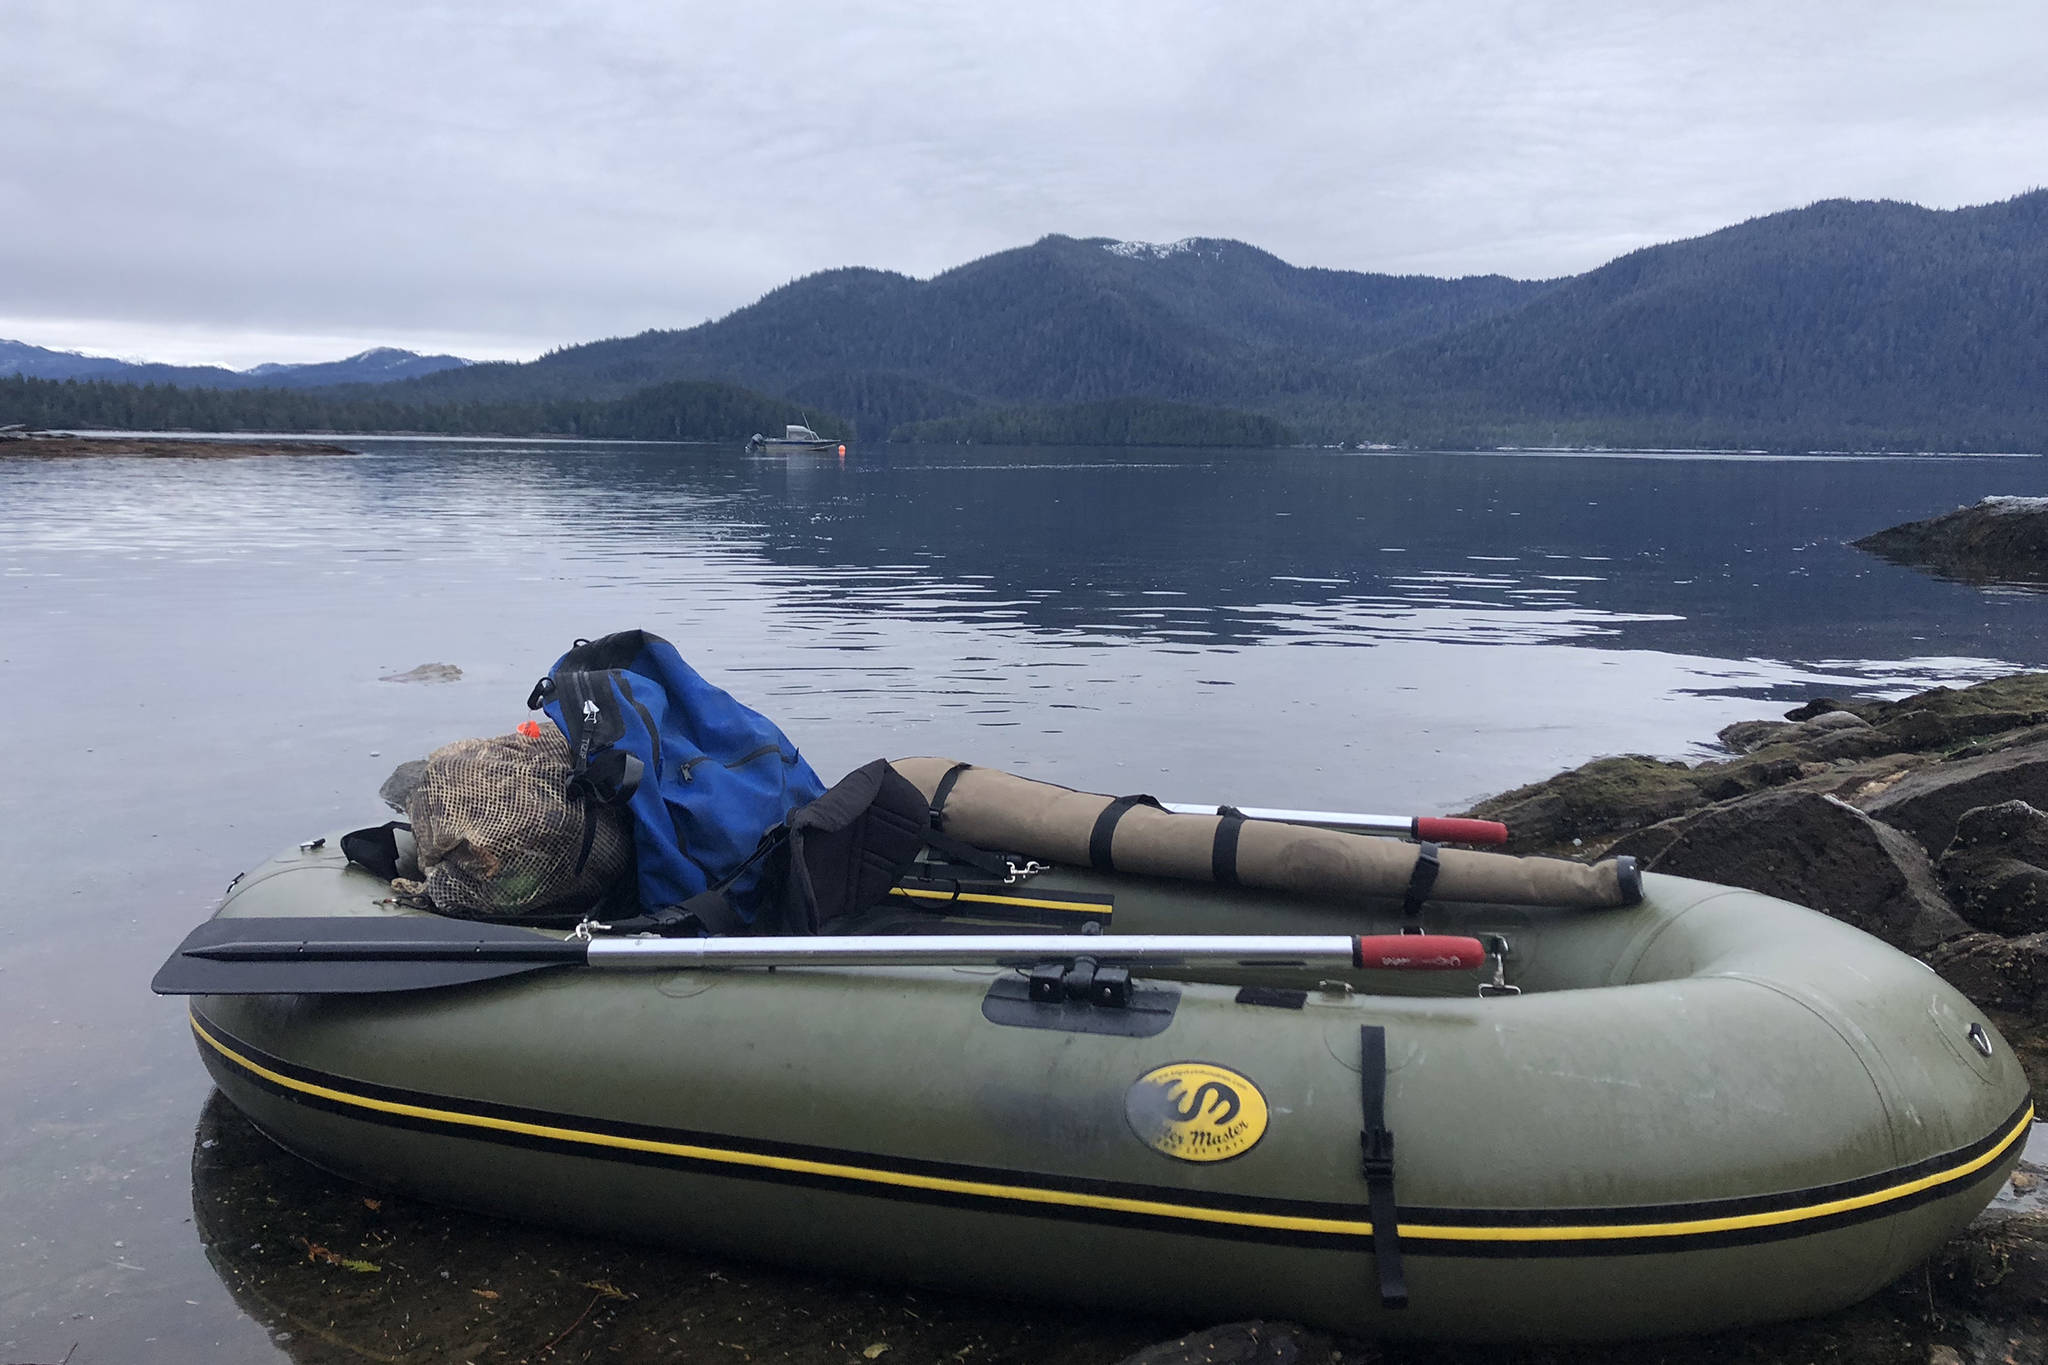 The author is afraid of canoes and kayaks, so he uses this raft to go from anchored boat to shore for failed waterfowl hunts. (Courtesy Photo | Jeff Lund)